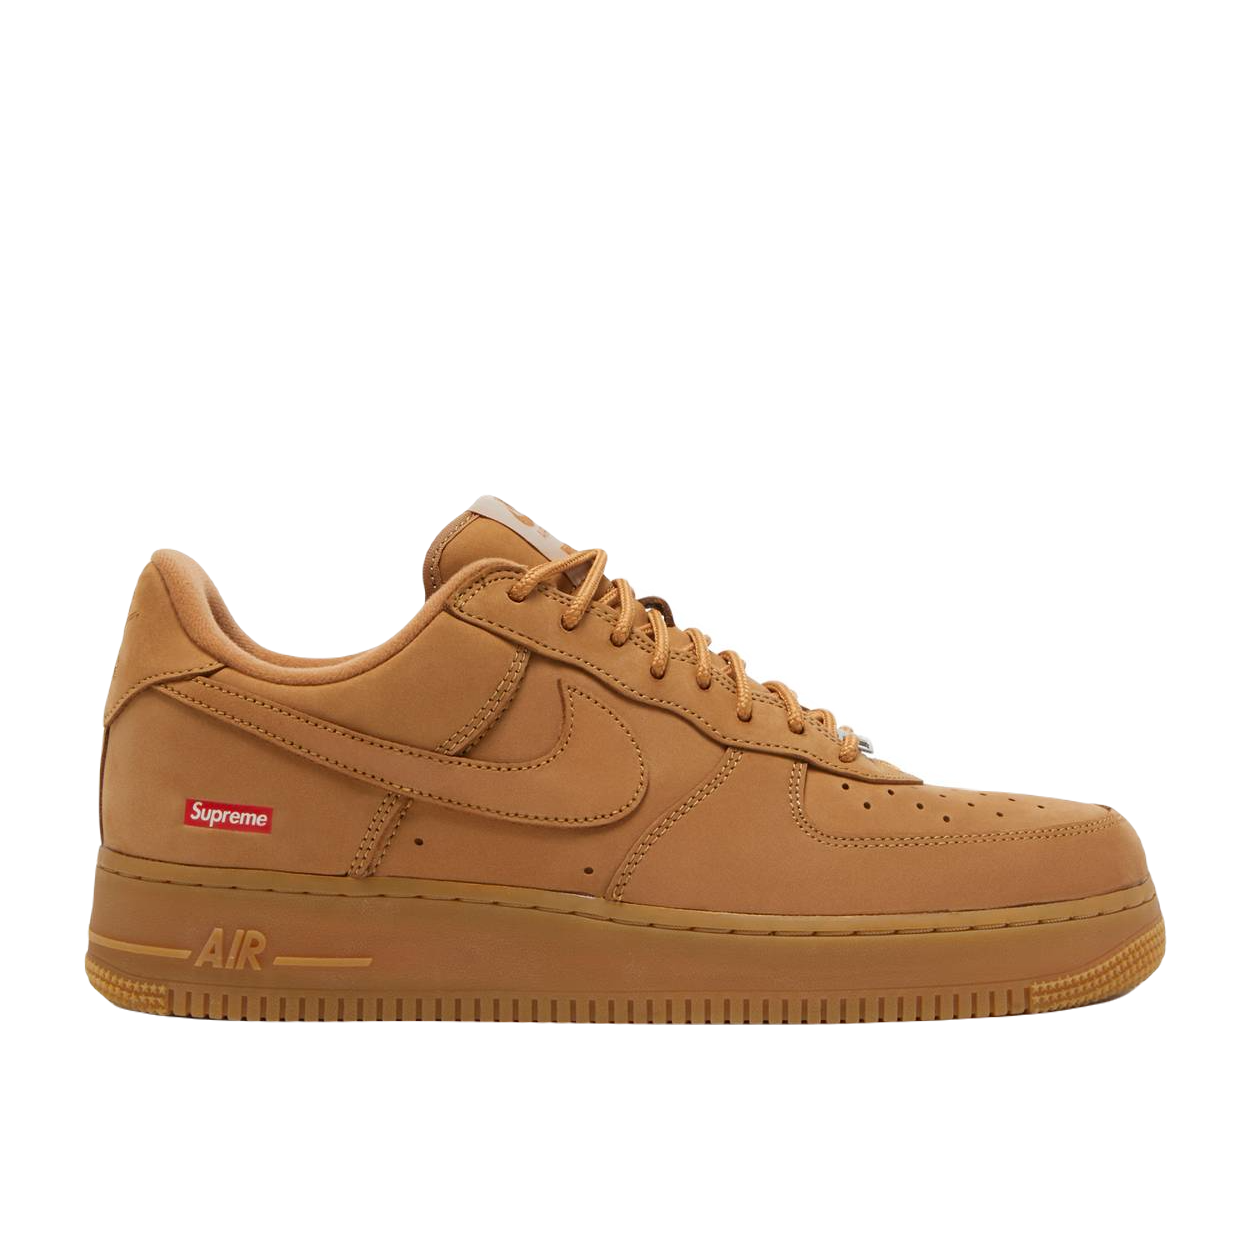 Air Force 1 Low W SP x Supreme - Wheat - Used